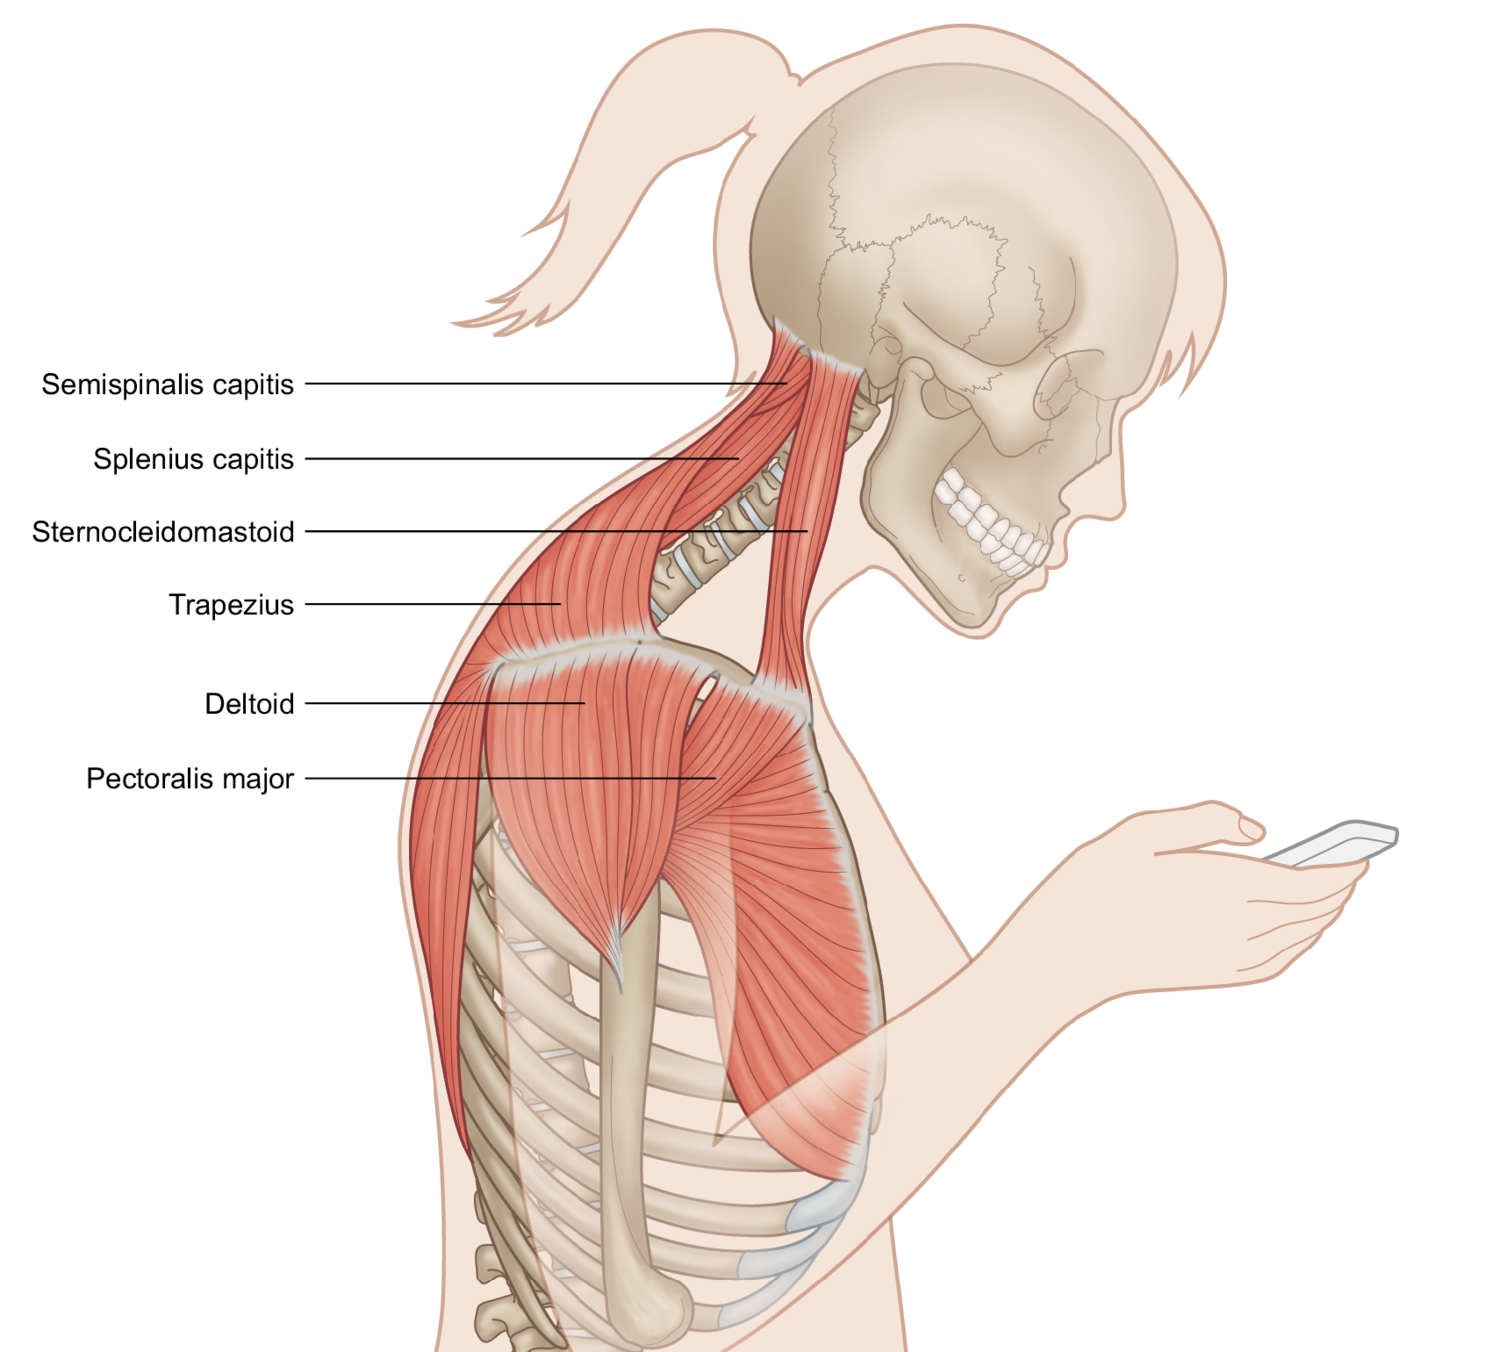 Thoracic Outlet Syndrome can be caused by Forward Head Posture